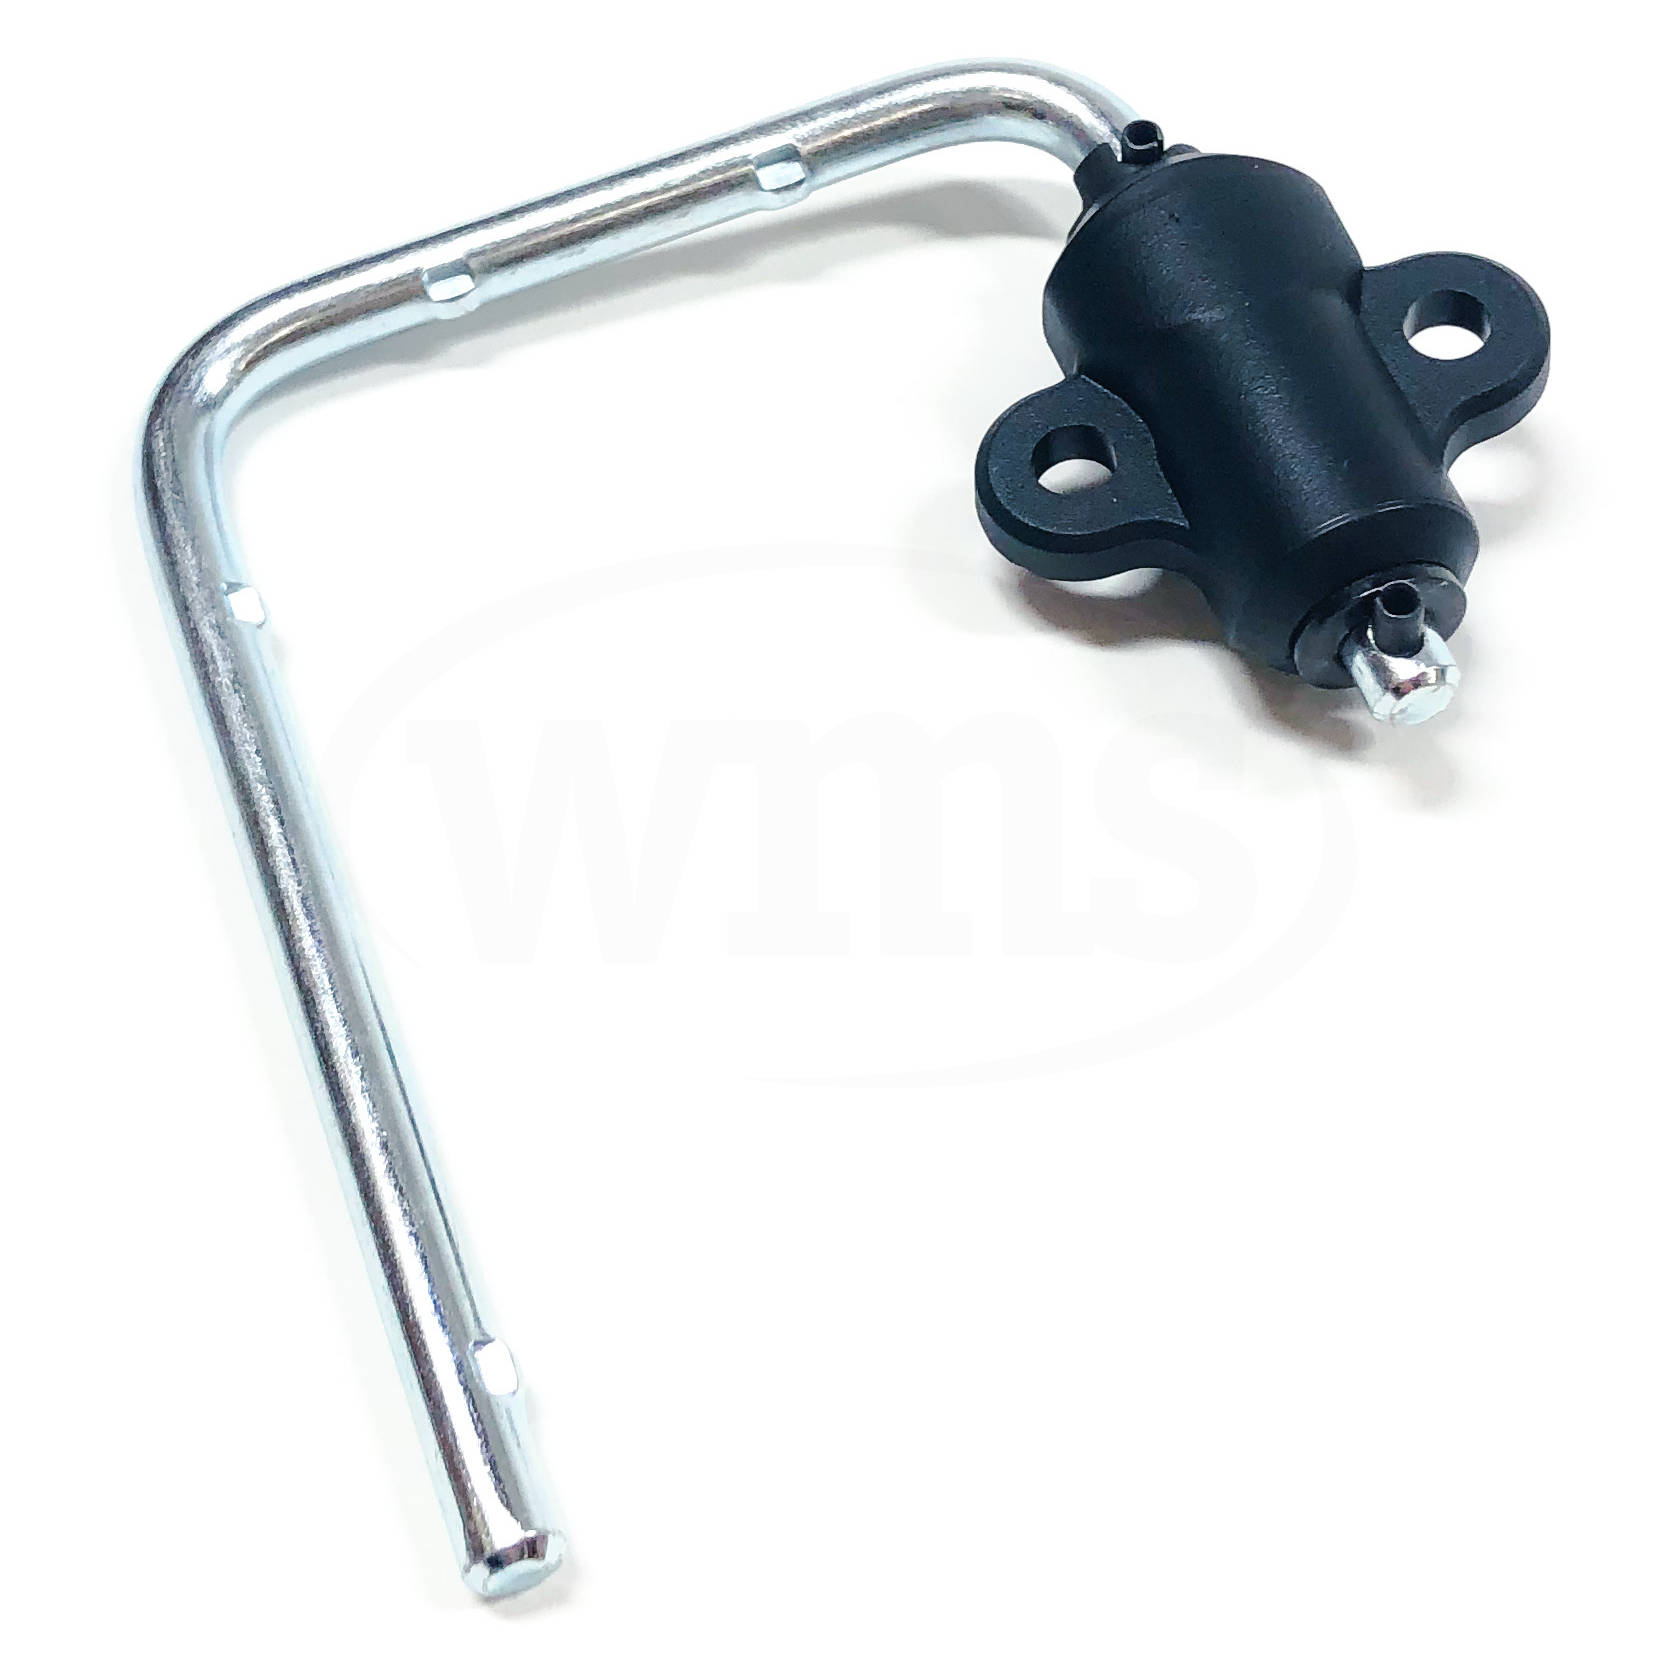 14-36-0031 Milwaukee Rafter Hook Assembly 4